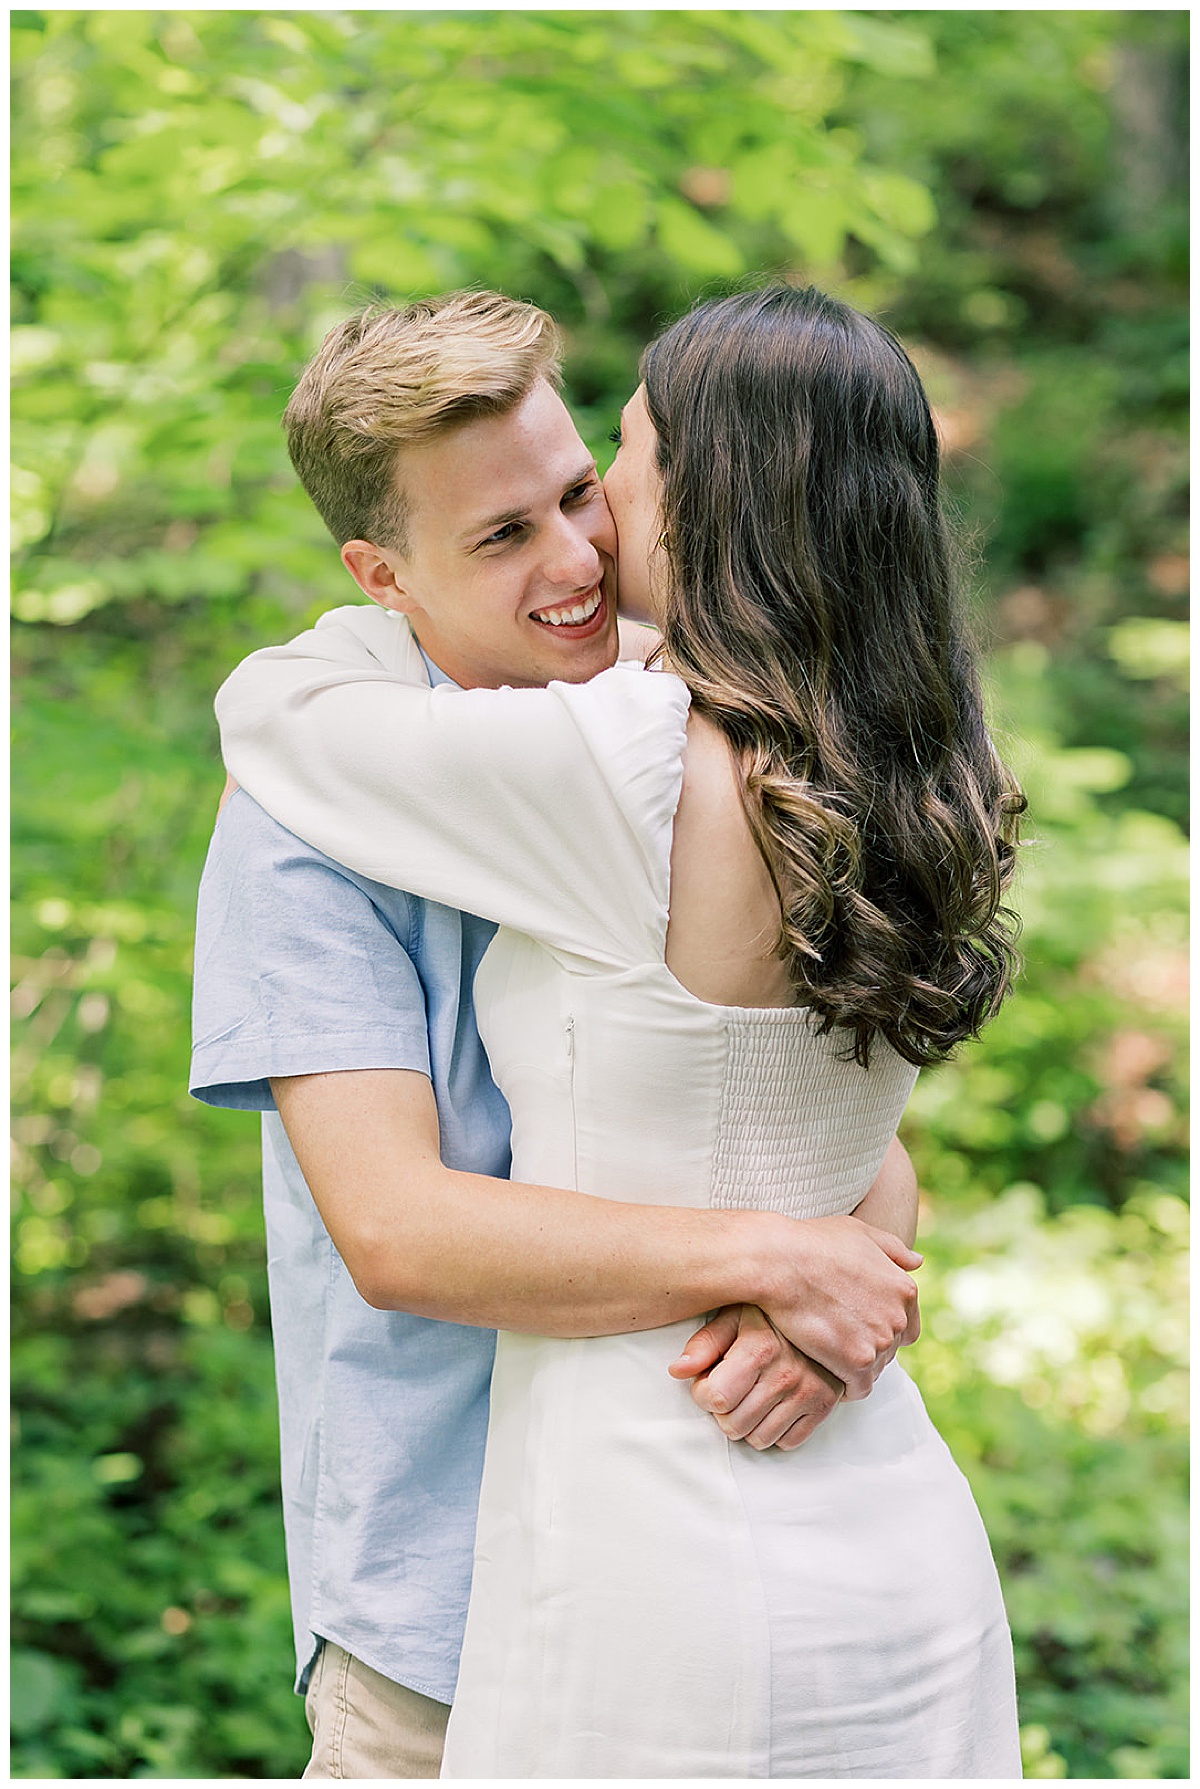 Woman and man hug one another during their Ann Arbor peony garden engagement session